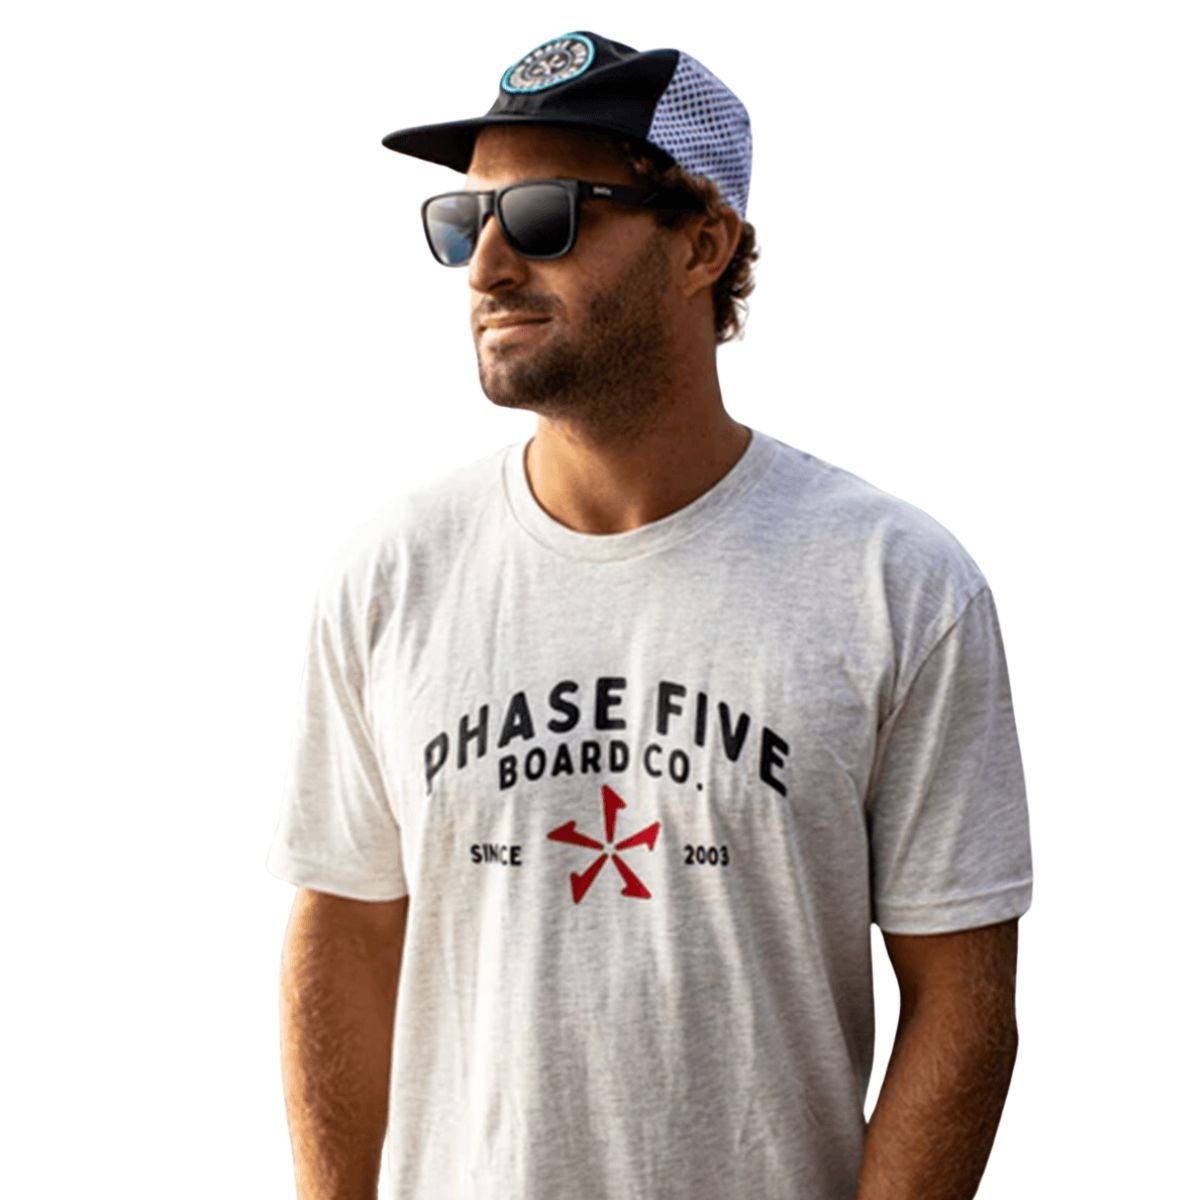 Phase 5 Captain Tee in Oatmeal - BoardCo